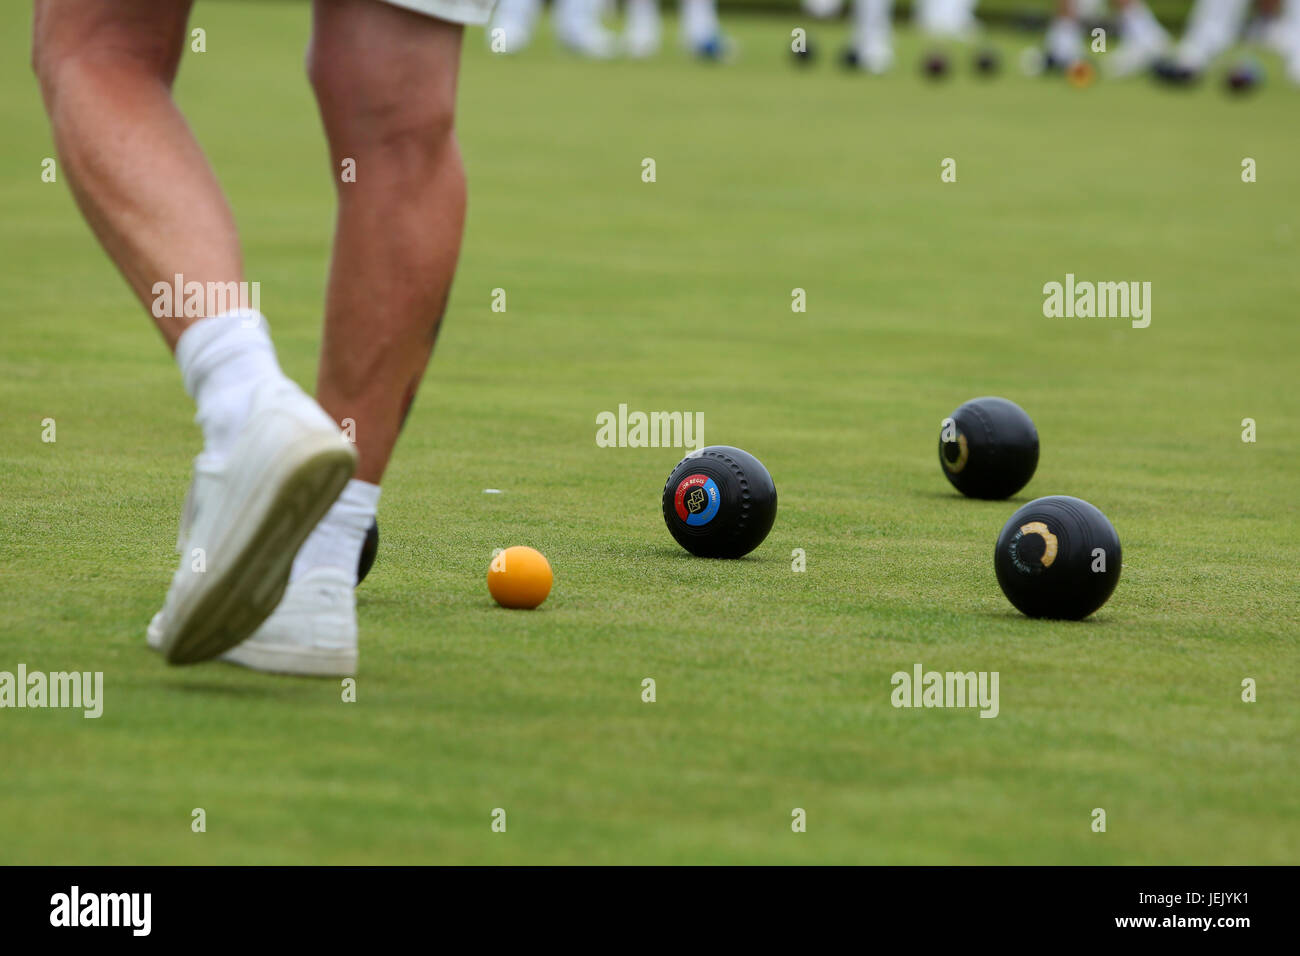 Players from Bognor Regis Bowls Club in action in West Sussex, UK. Stock Photo